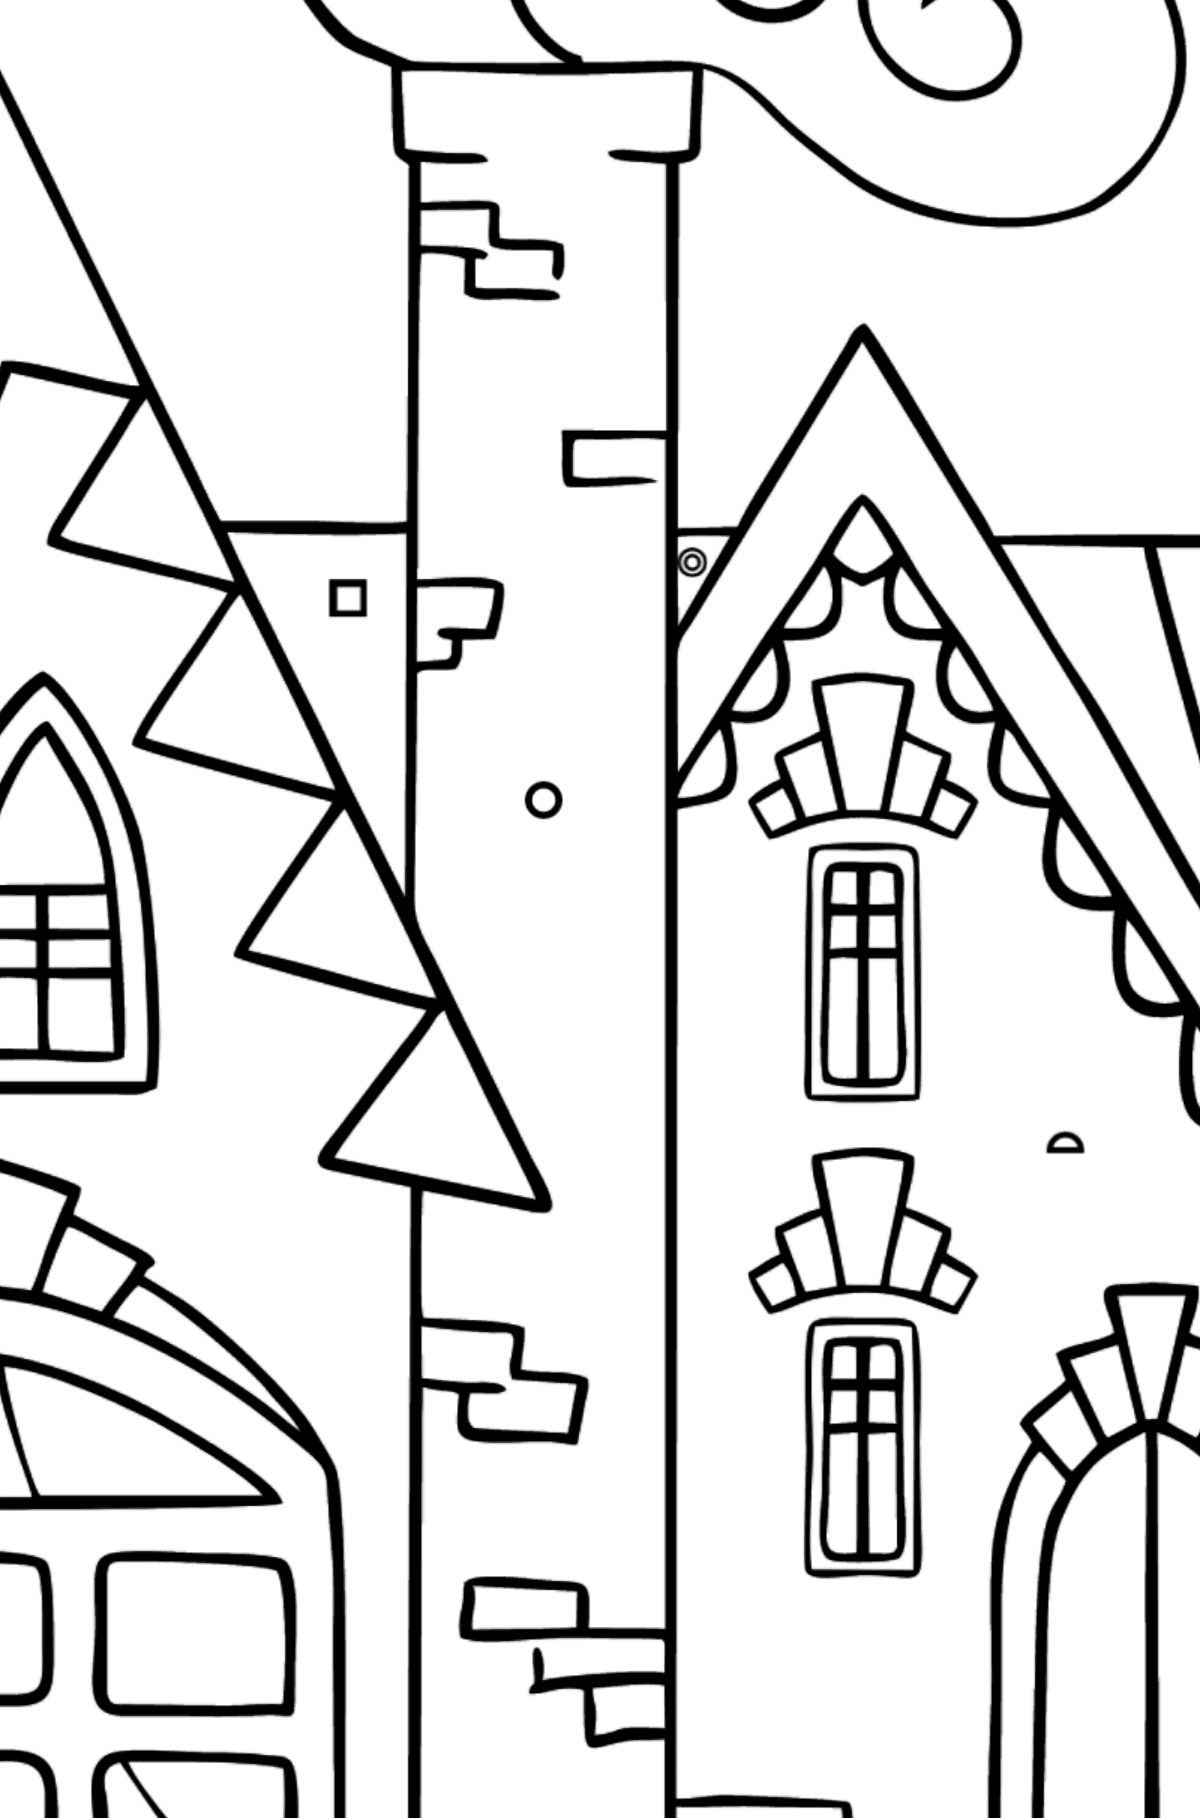 Simple Coloring Page - A Charming House - Coloring by Geometric Shapes for Kids